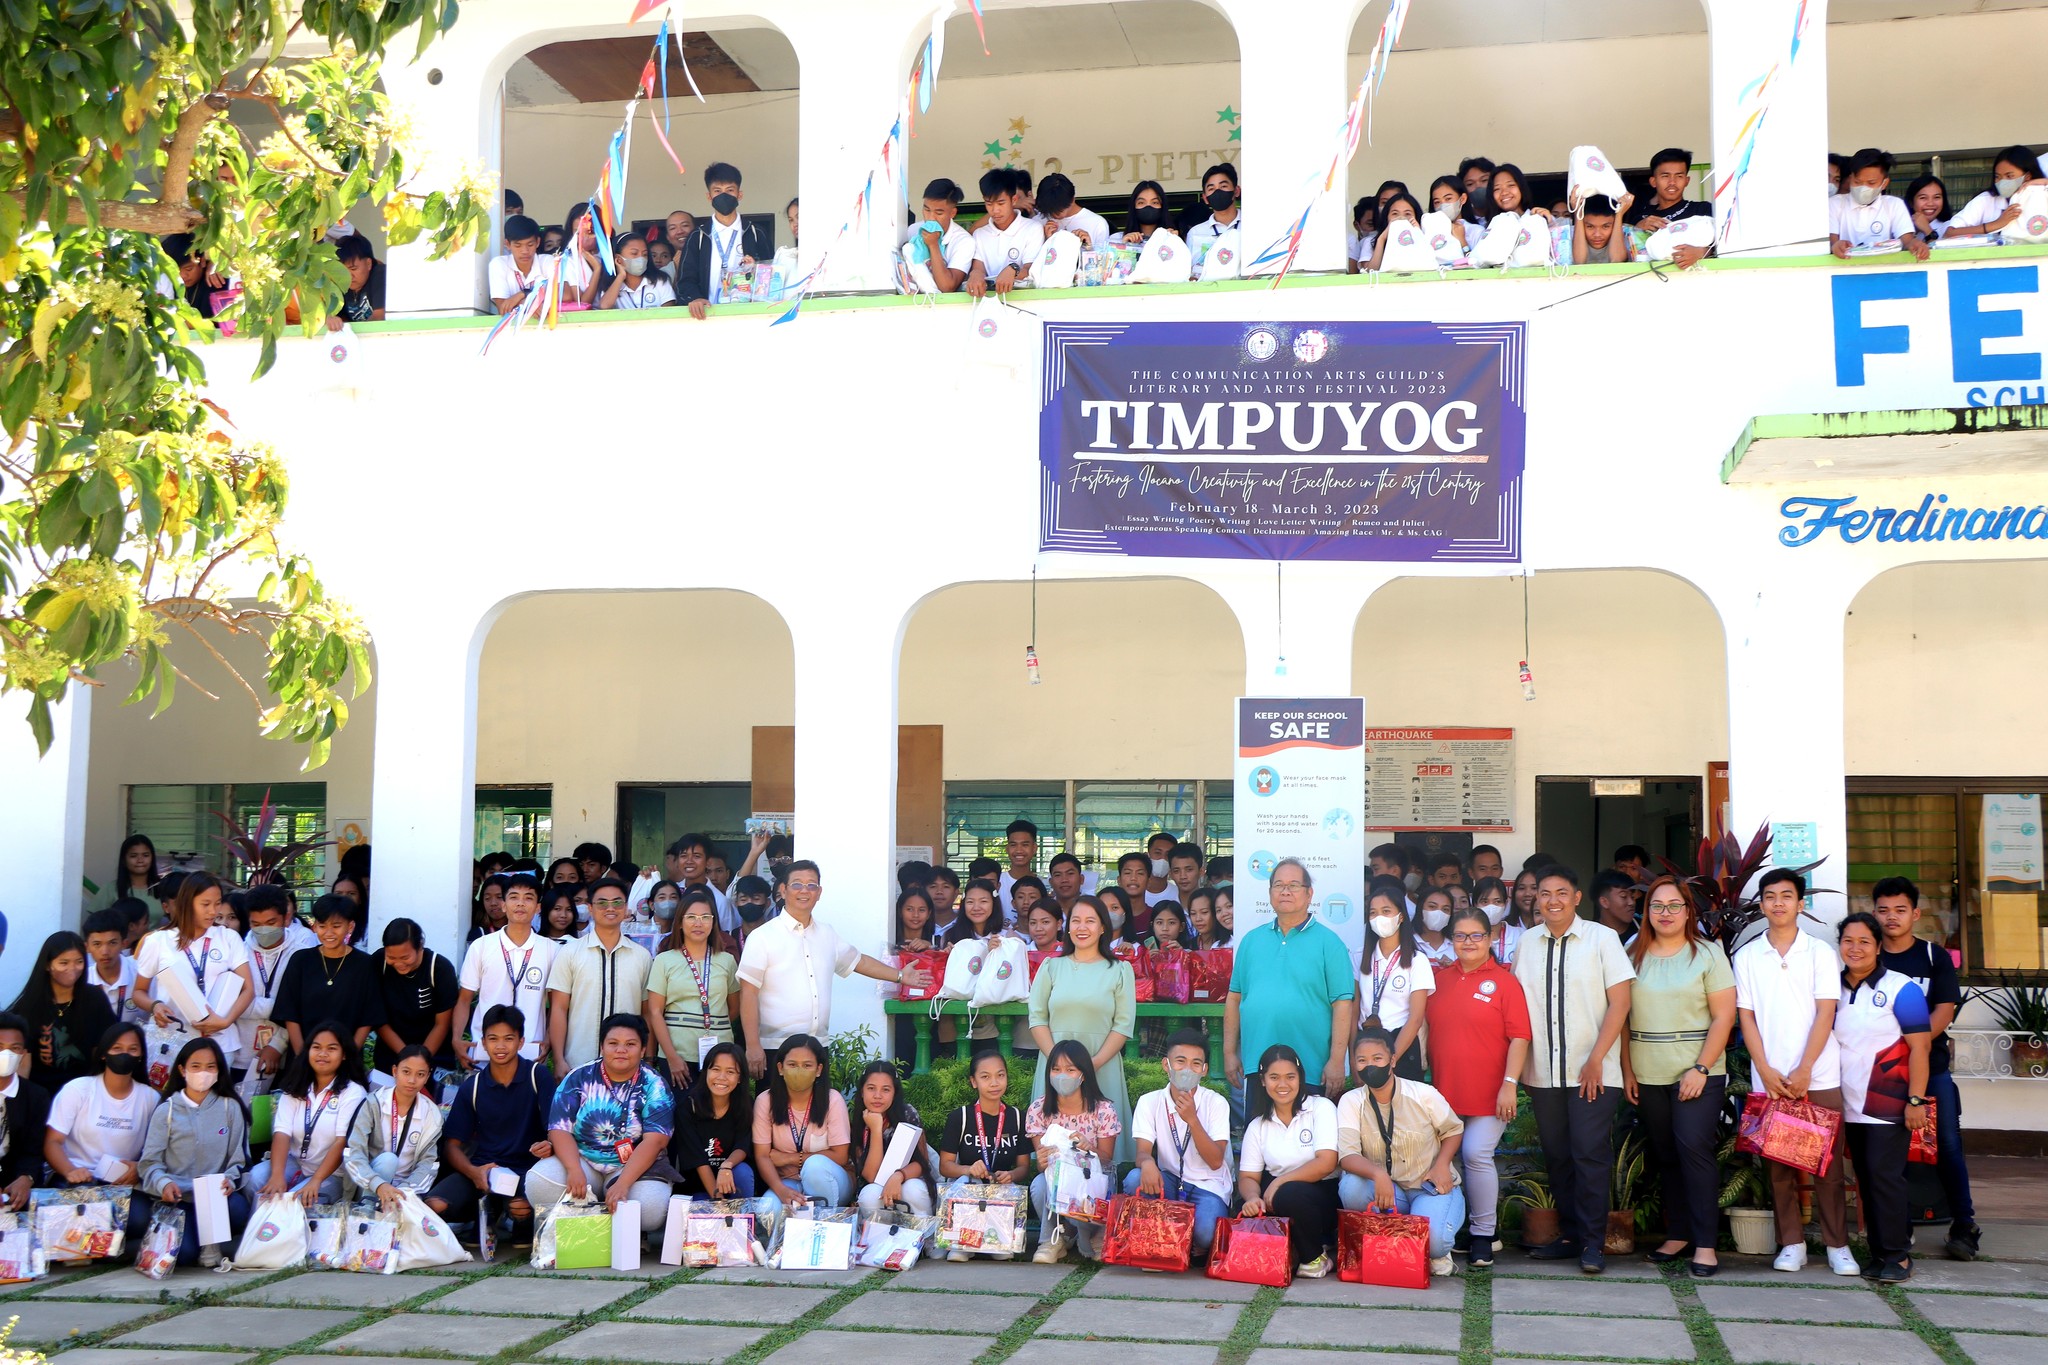 CITY GOVERNMENT OF BATAC DISTRIBUTES SCHOOL SUPPLIES & HYGIENE KITS TO PUBLIC SCHOOL STUDENTS